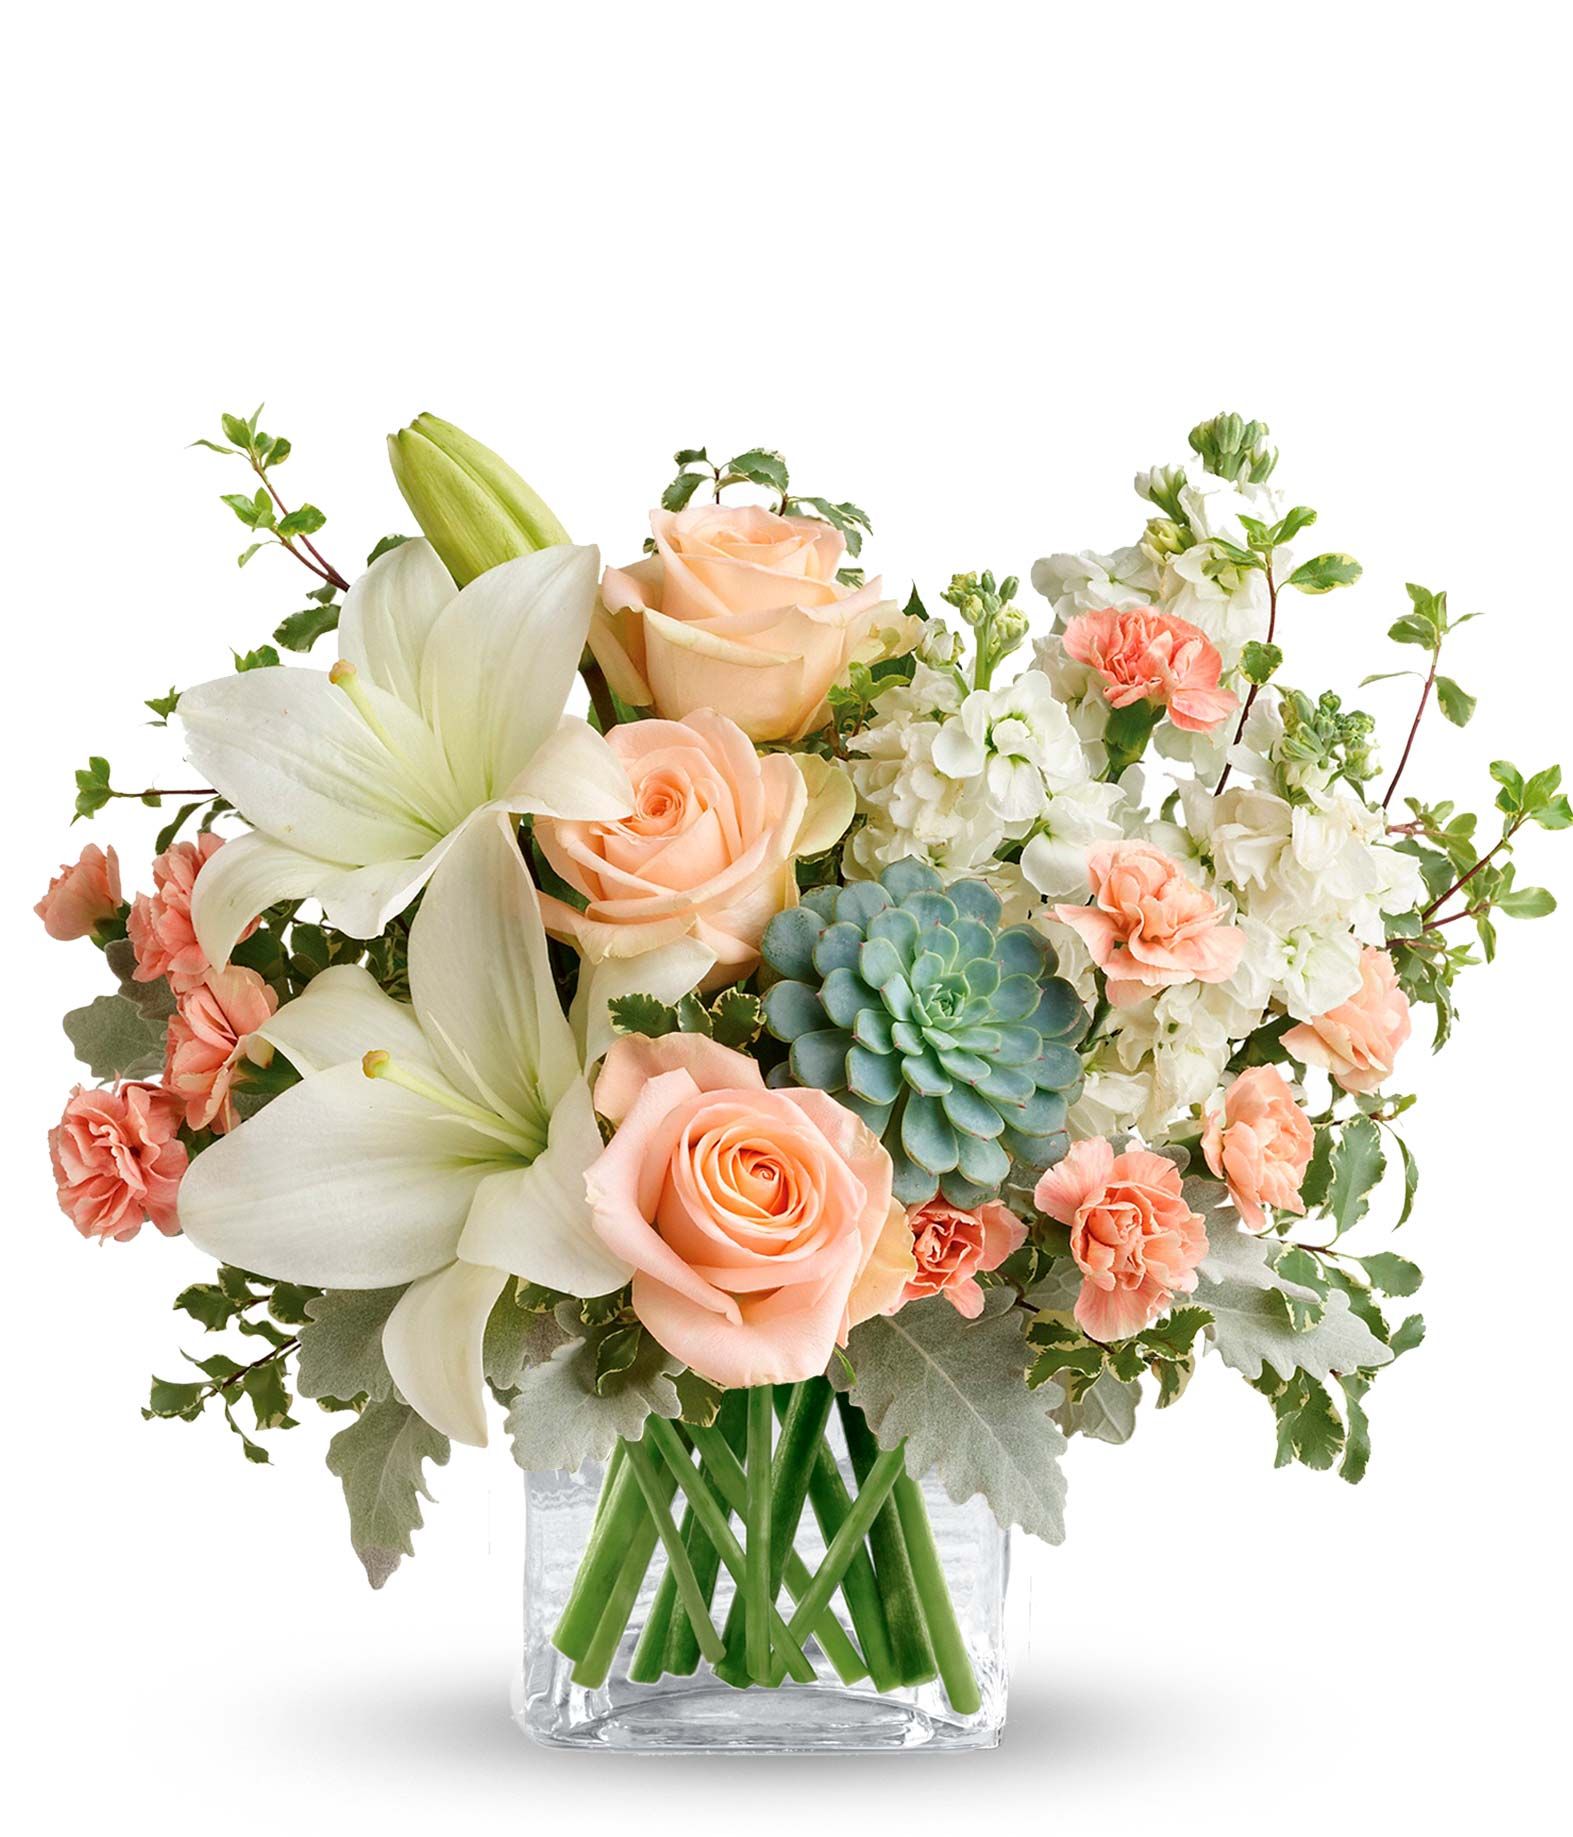 Southern Peach Bouquet at From You Flowers | From You Flowers